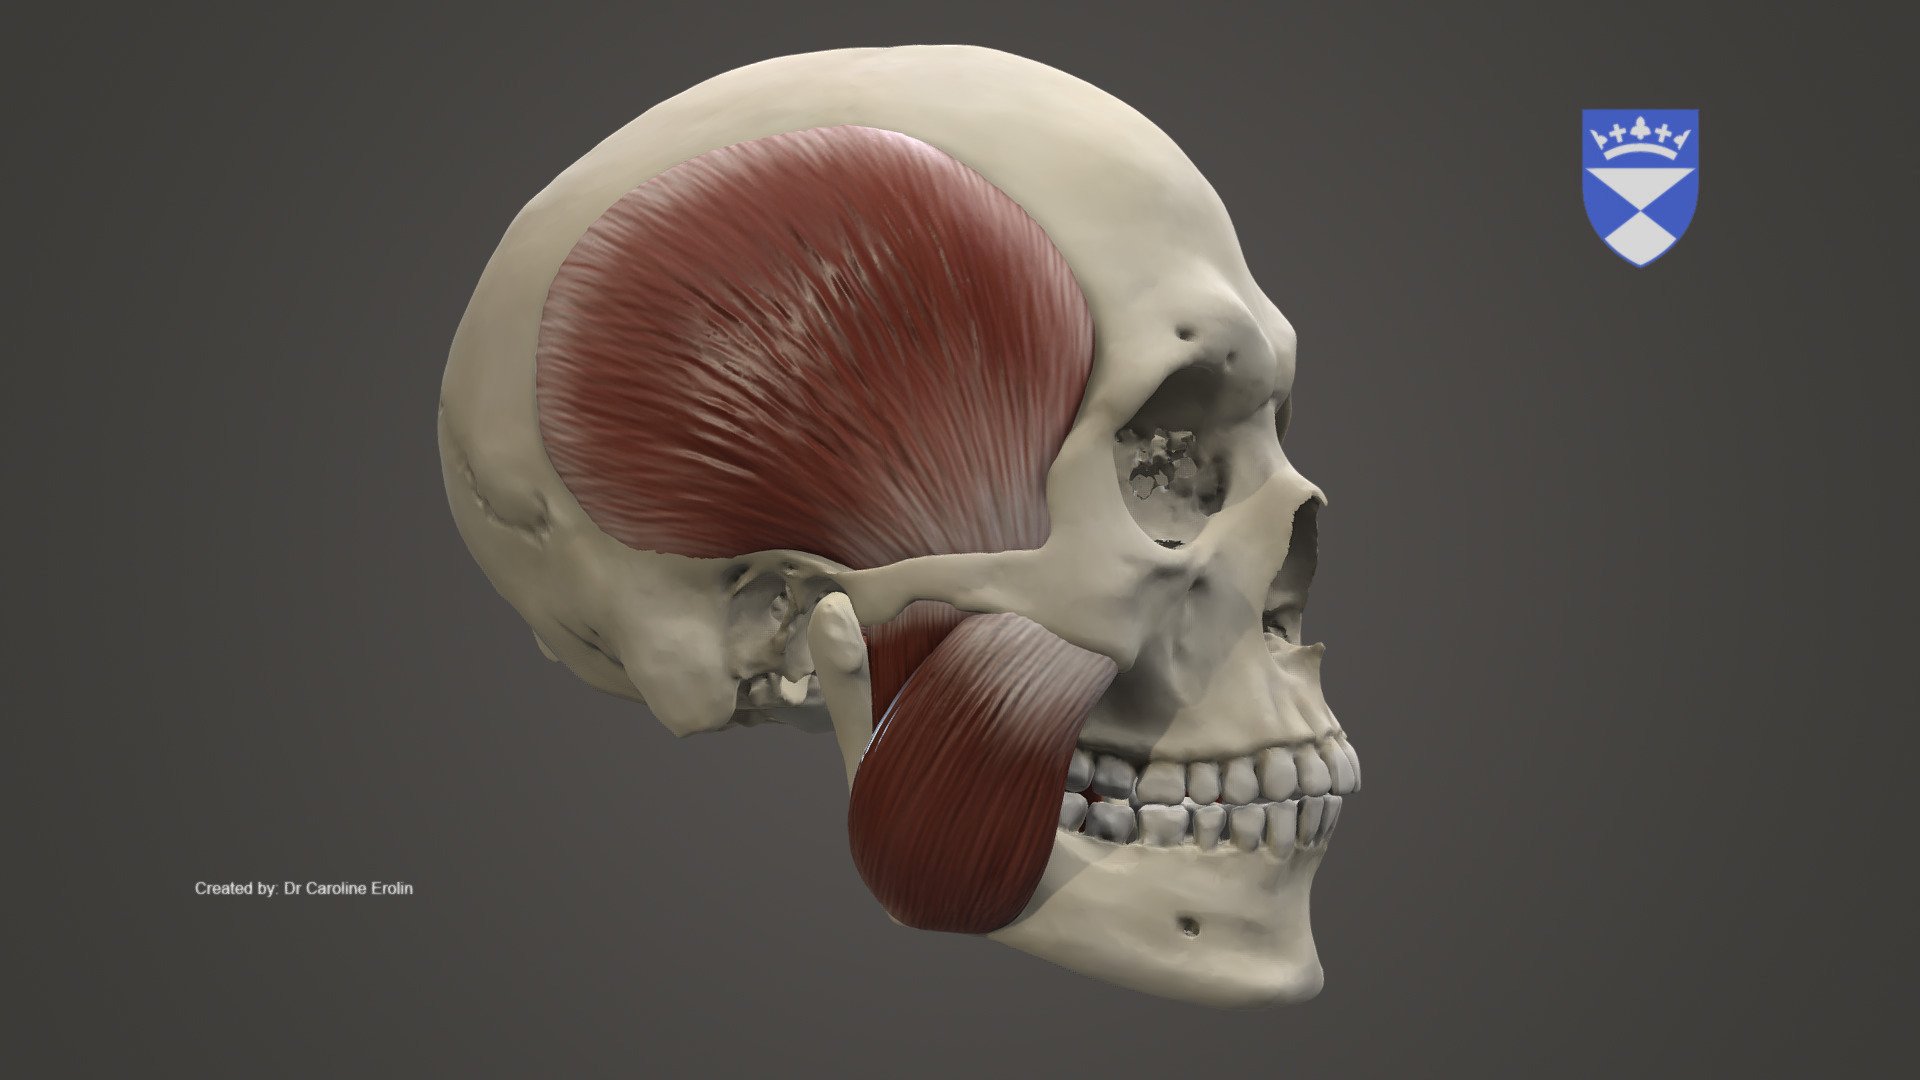 Model demonstrating the muscles of mastication. 

The skull is based on a microCT scan by the author while the muscles were sculpted in Zbrsuh. Texture added in Zbrush 3d model